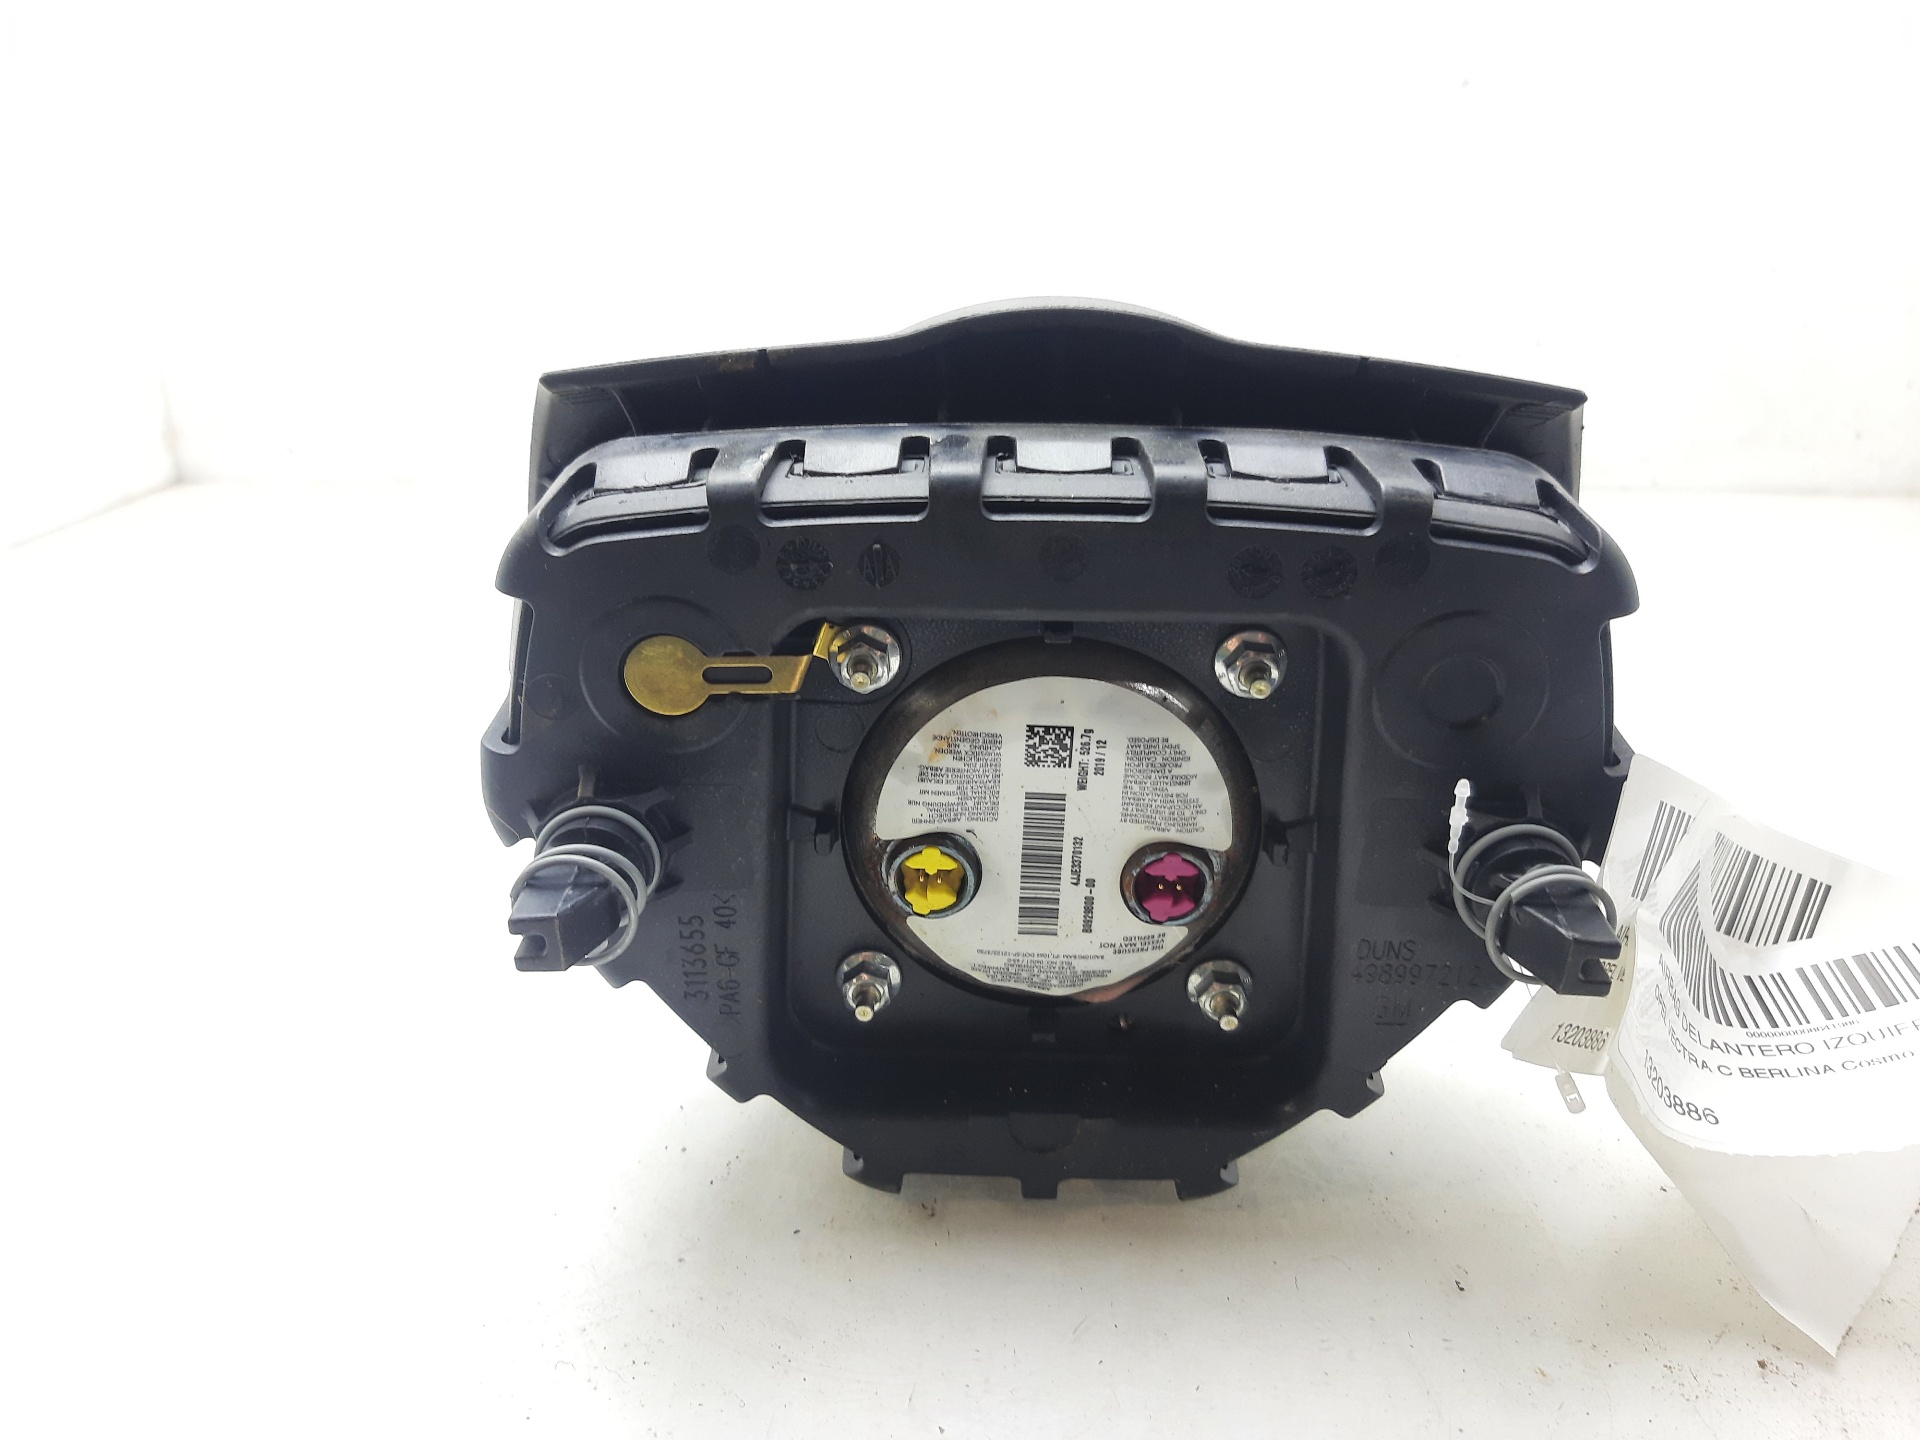 OPEL Vectra C (2002-2005) Other Control Units 13203886 23988737